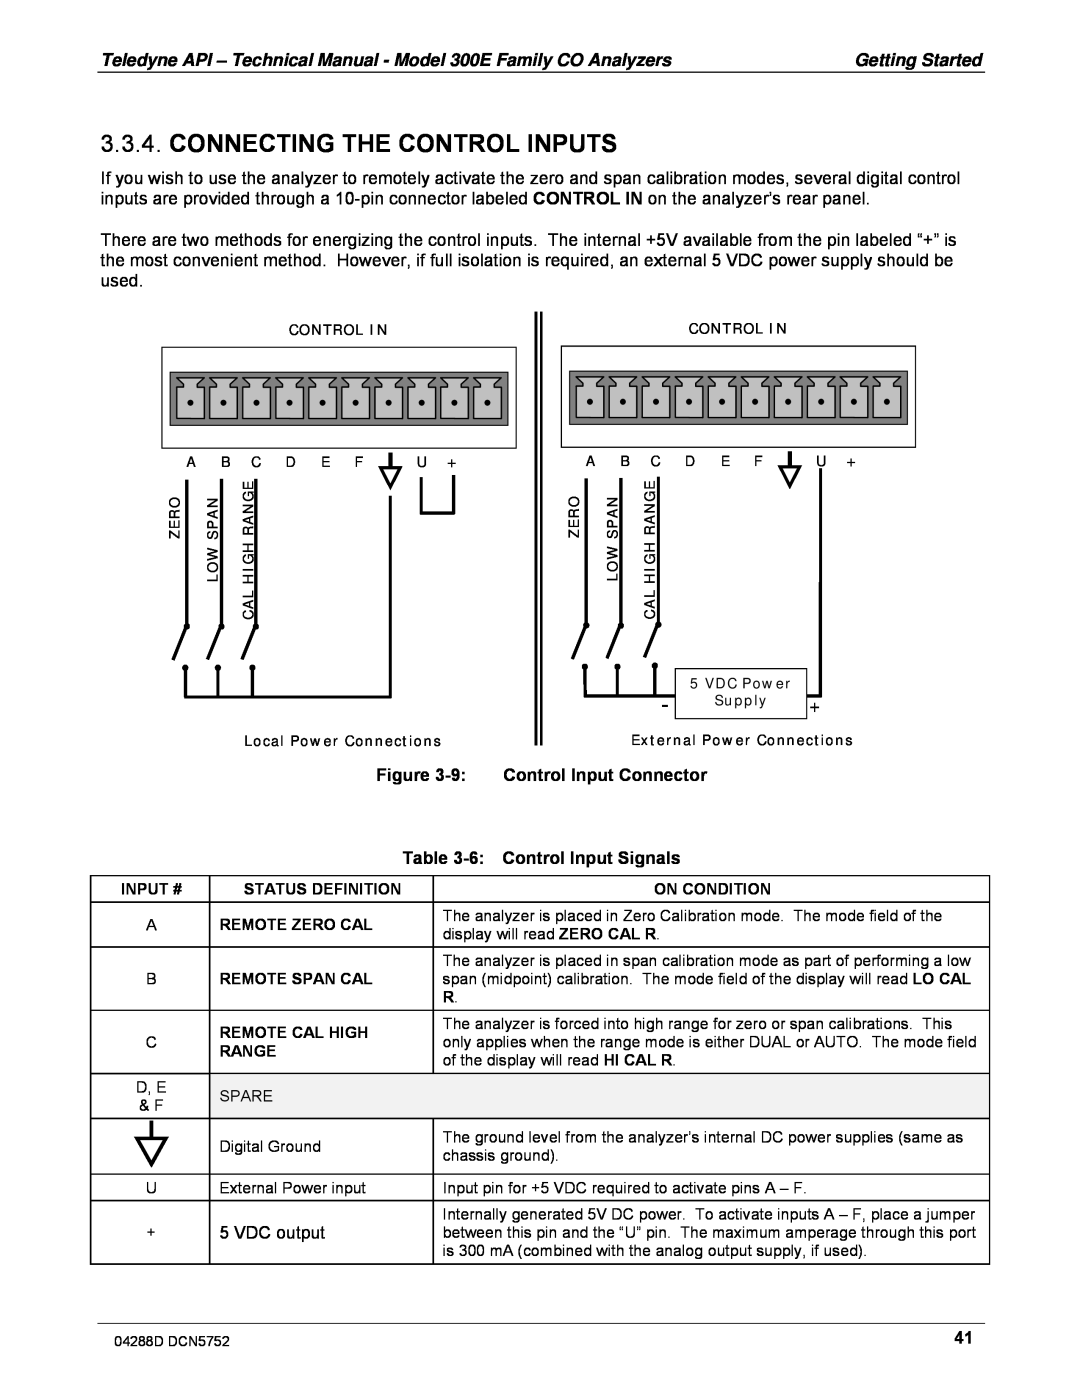 Teledyne M300EM operation manual Connecting The Control Inputs, Figure, Control Input Connector, 6:Control Input Signals 